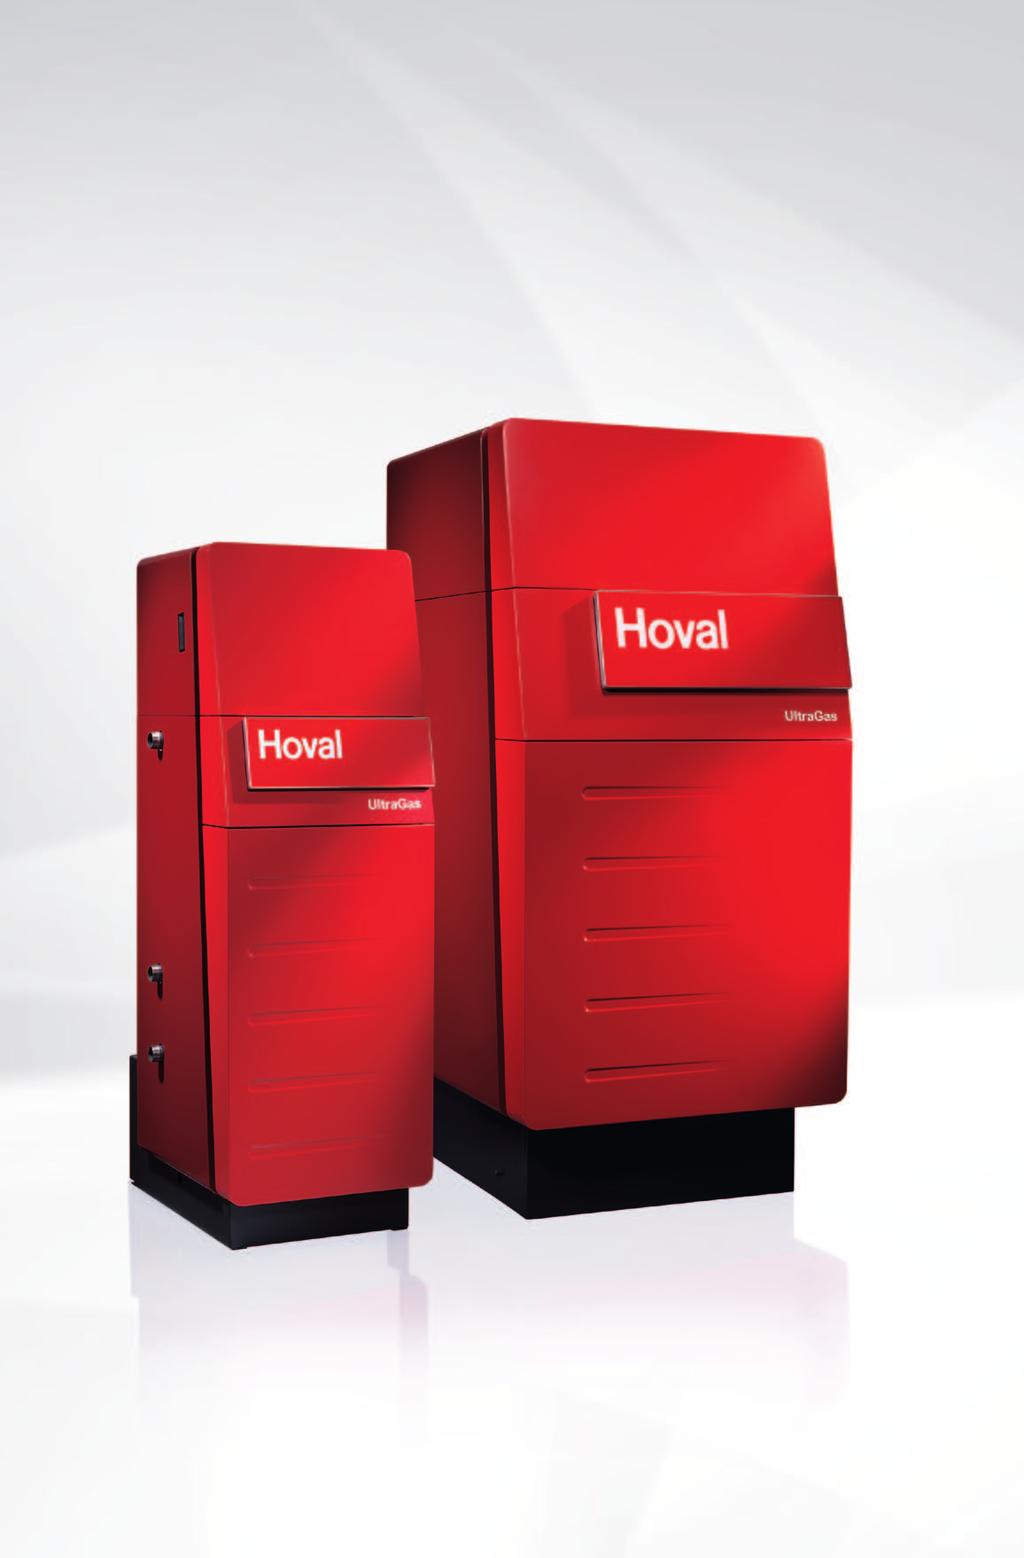 The complete UltraGas range extends from 15 kw single boilers to industrial 2000 kw double boiler systems. At Hoval we have the perfect system for any output requirement.